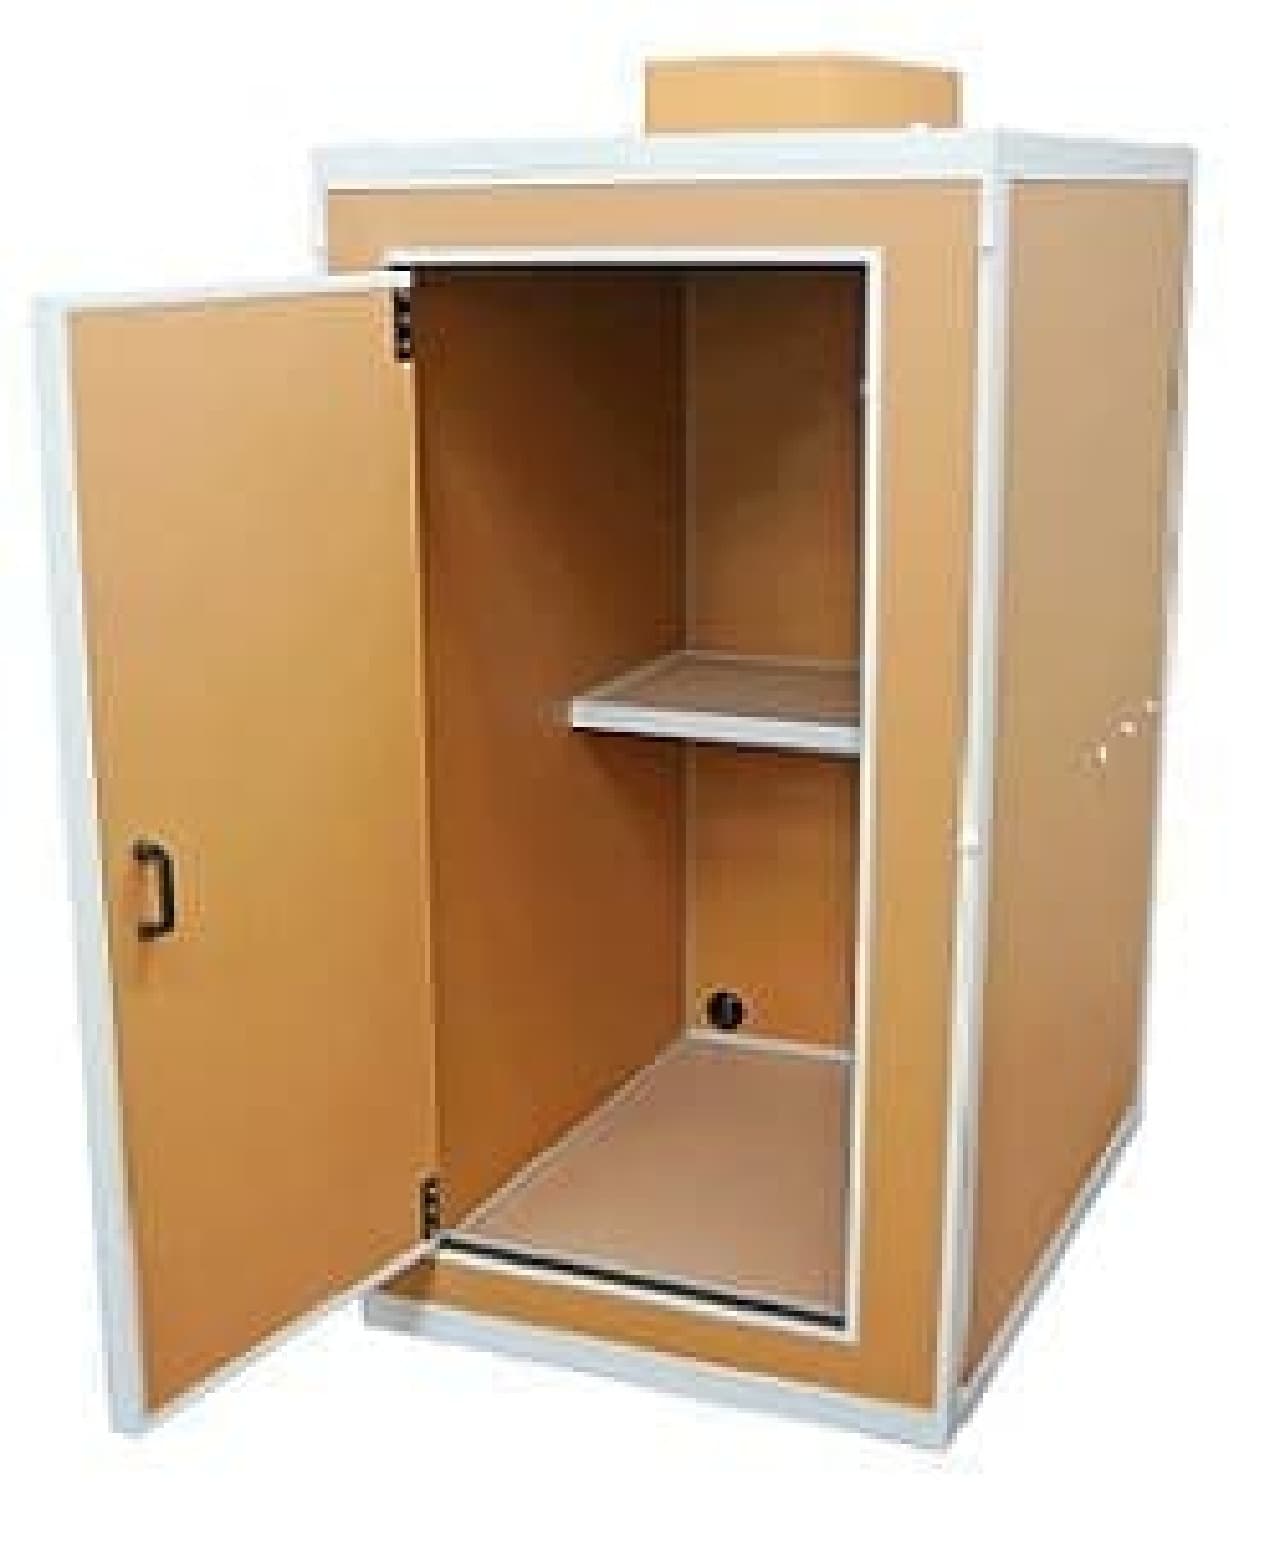 Since it is made of cardboard, the price is less than half that of a general soundproof room, but the soundproof performance is also reasonable.